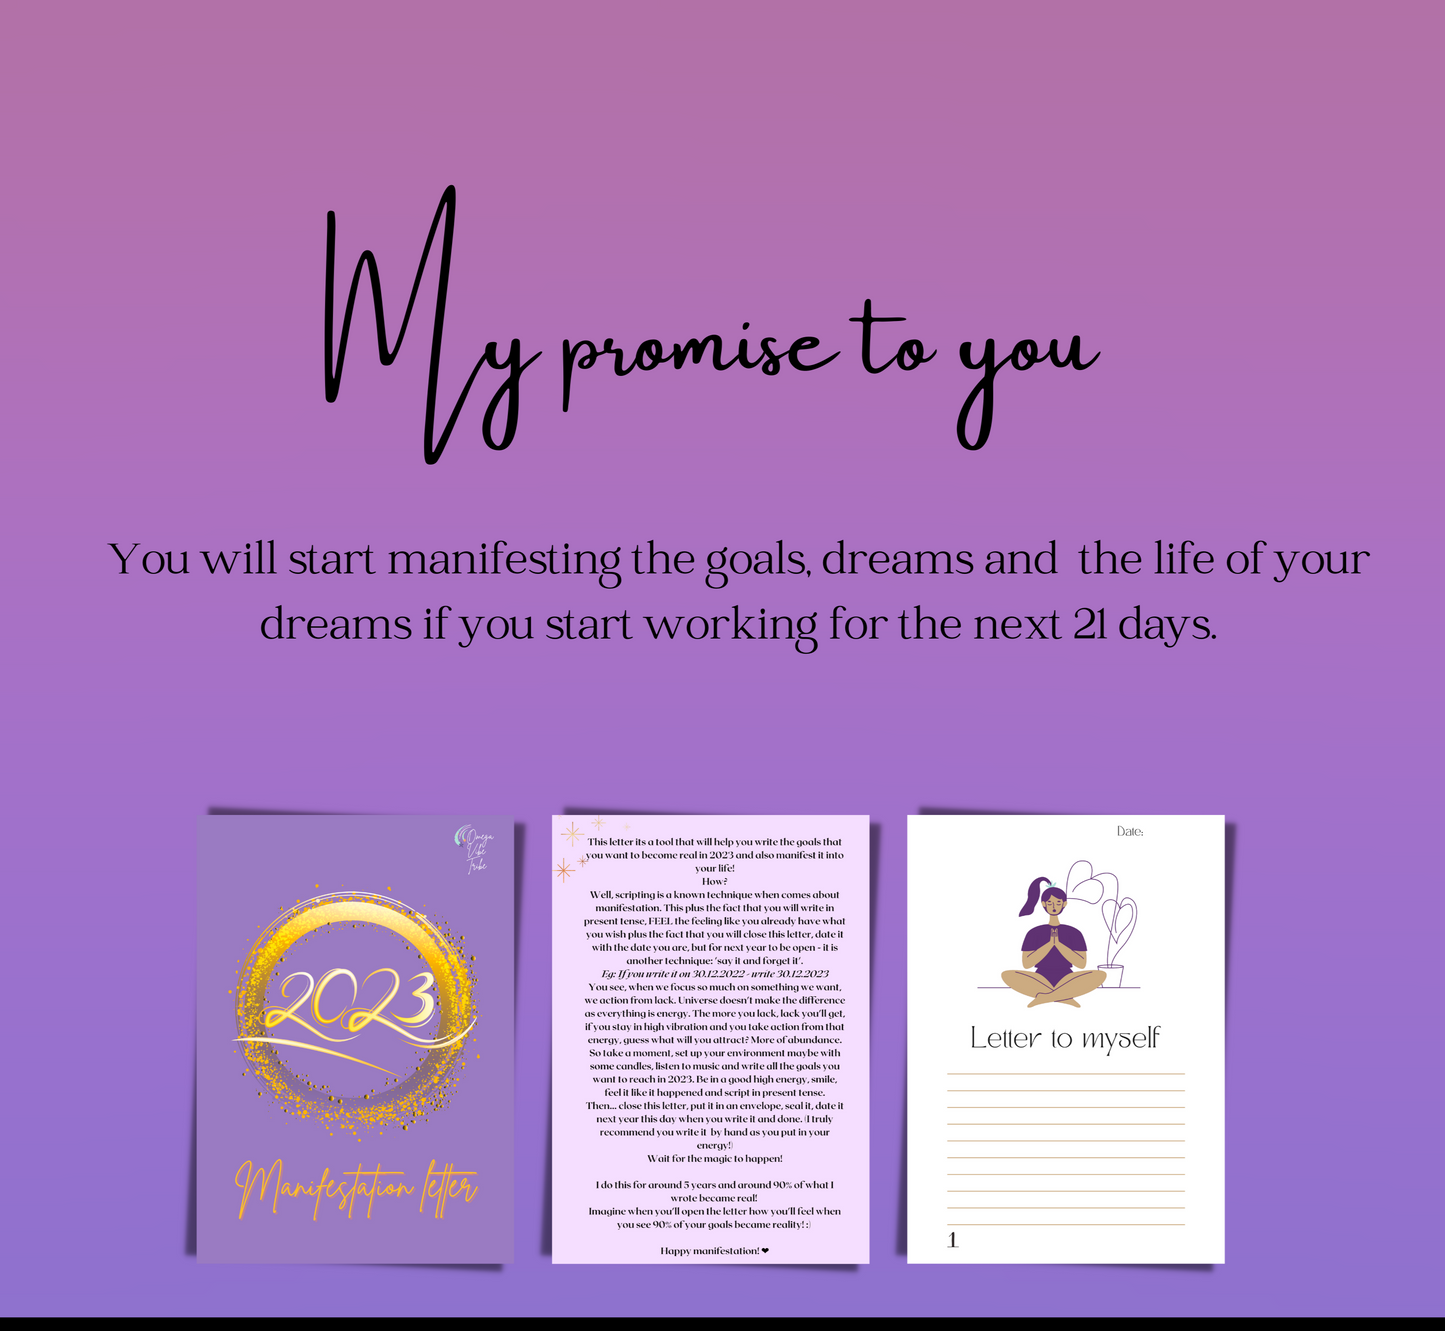 promise to you if you get this manifestation letter today: you will stsrt manifesting the goals, dreams and the life of your dreams if you start working on it for the next 21 days.